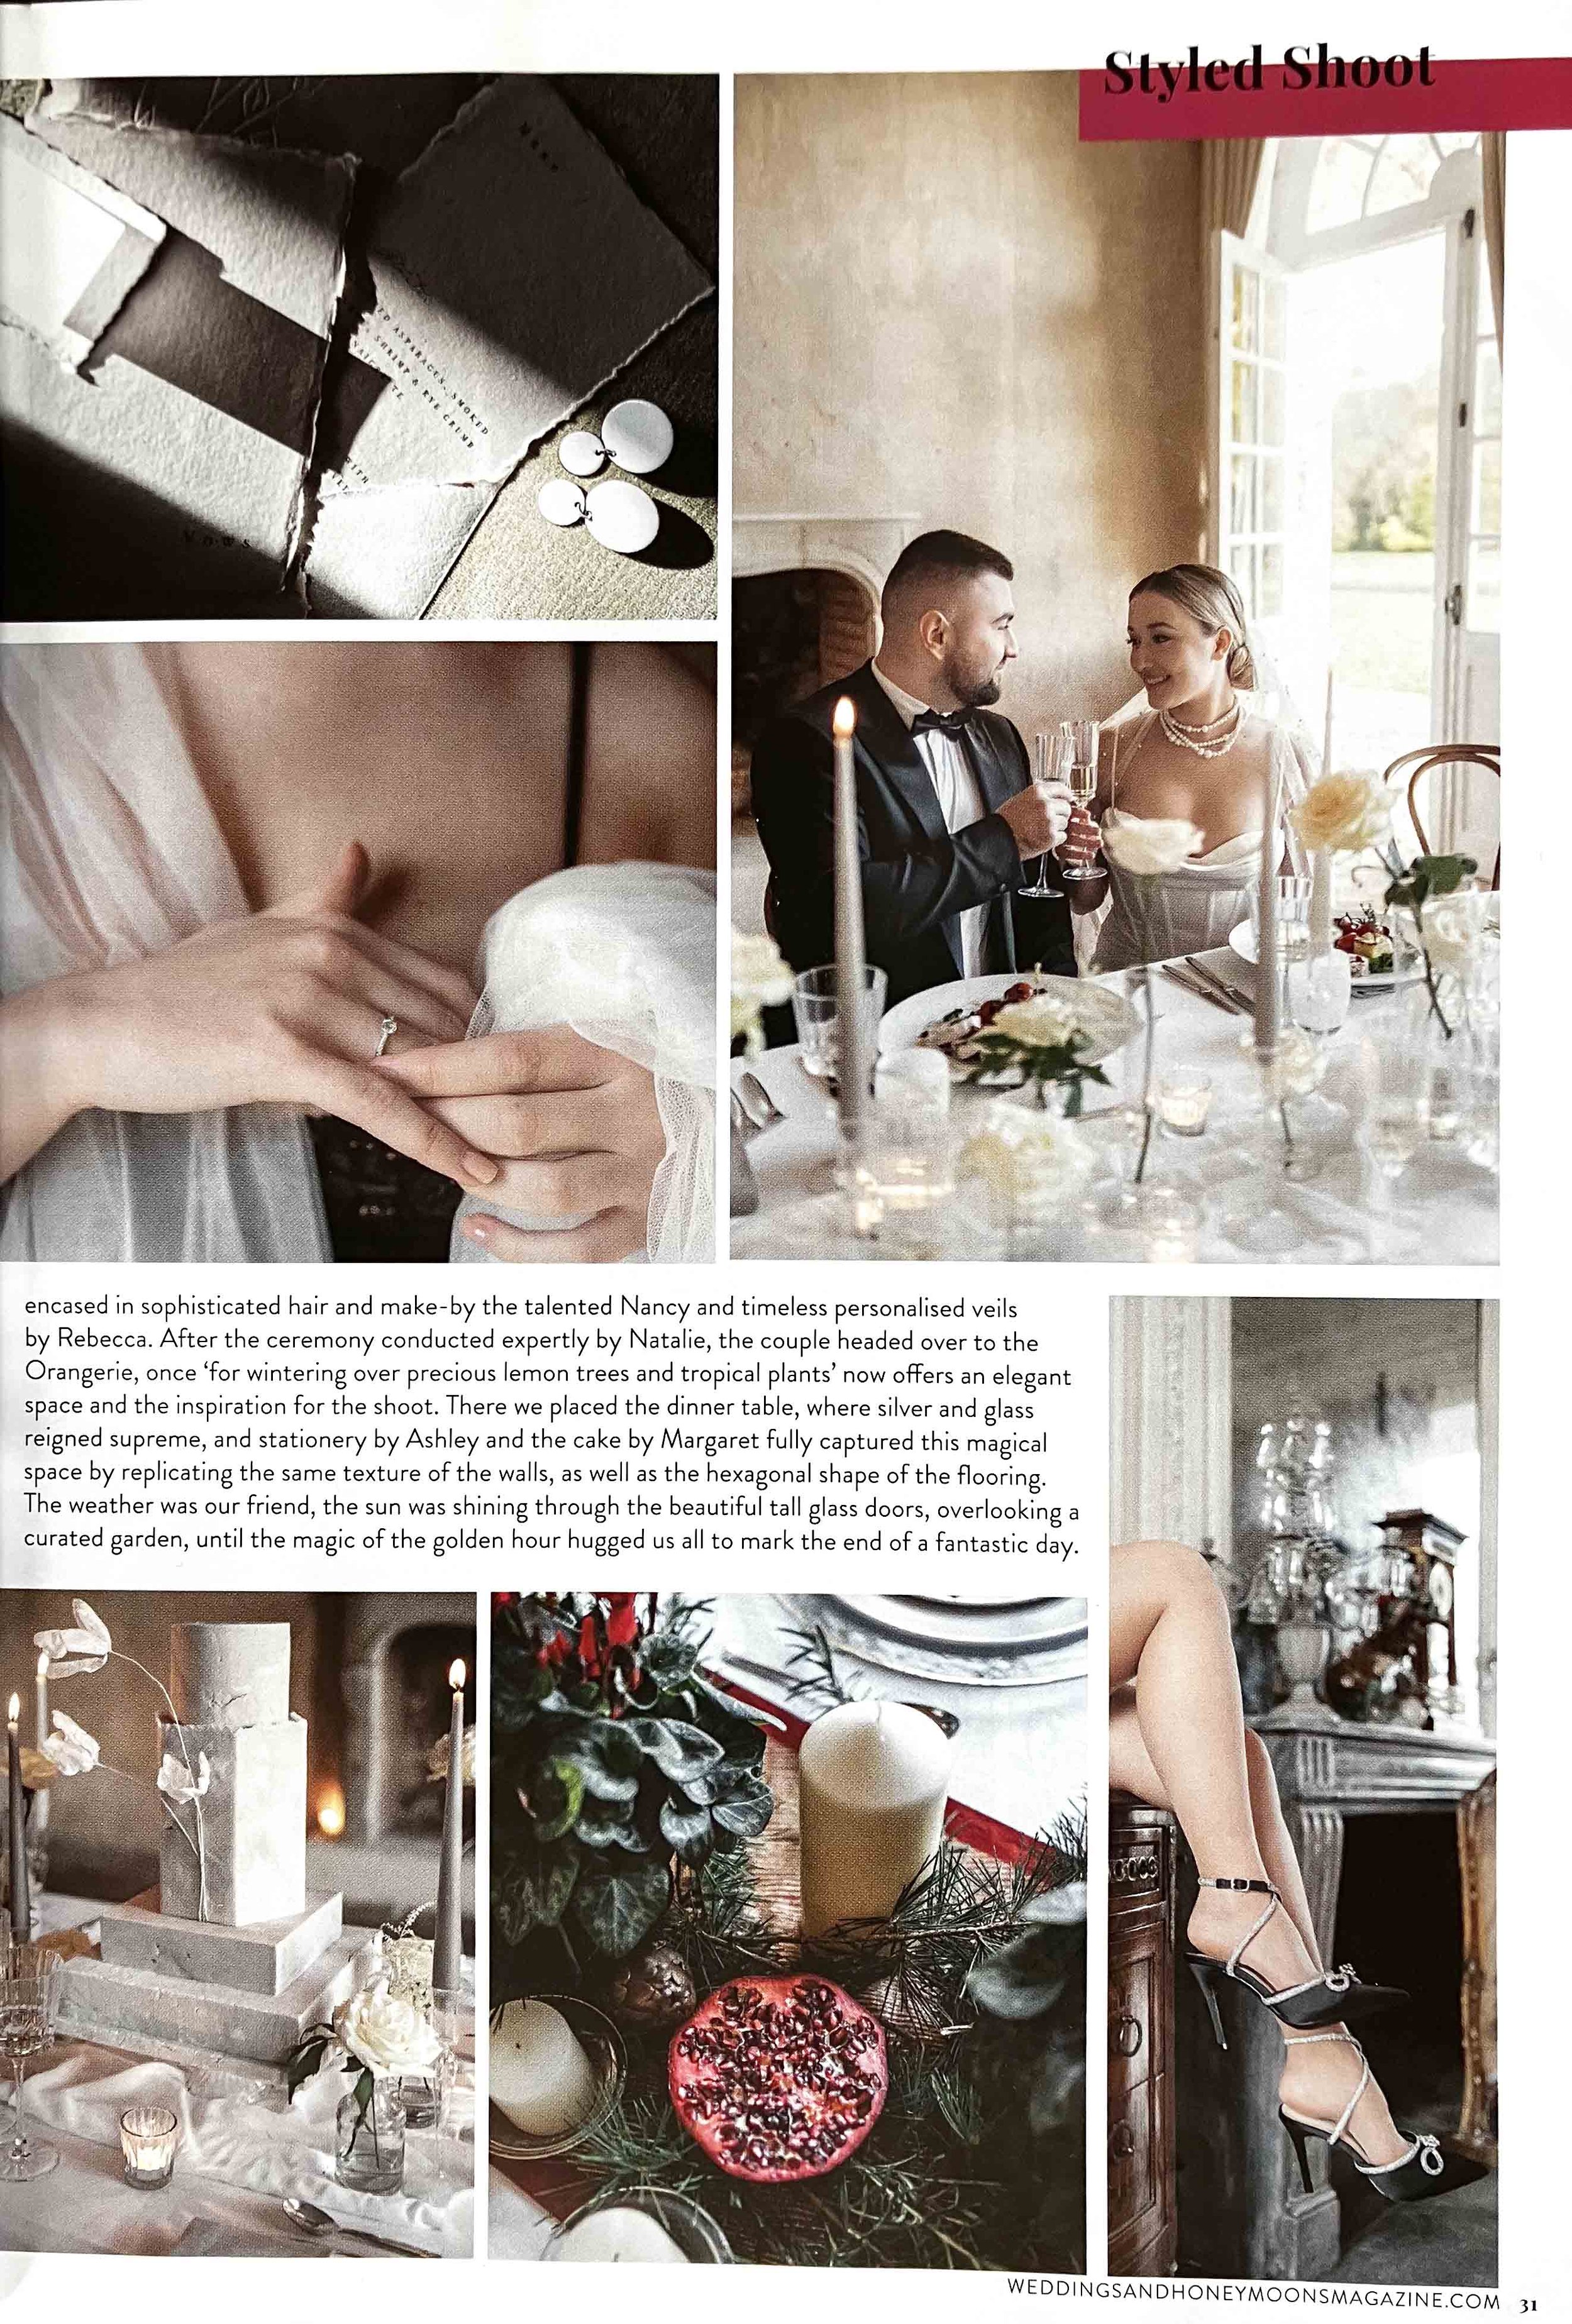 A magazine spread with pictures of a luxurious, intimate French chateau wedding at Chateau de Courtomer.